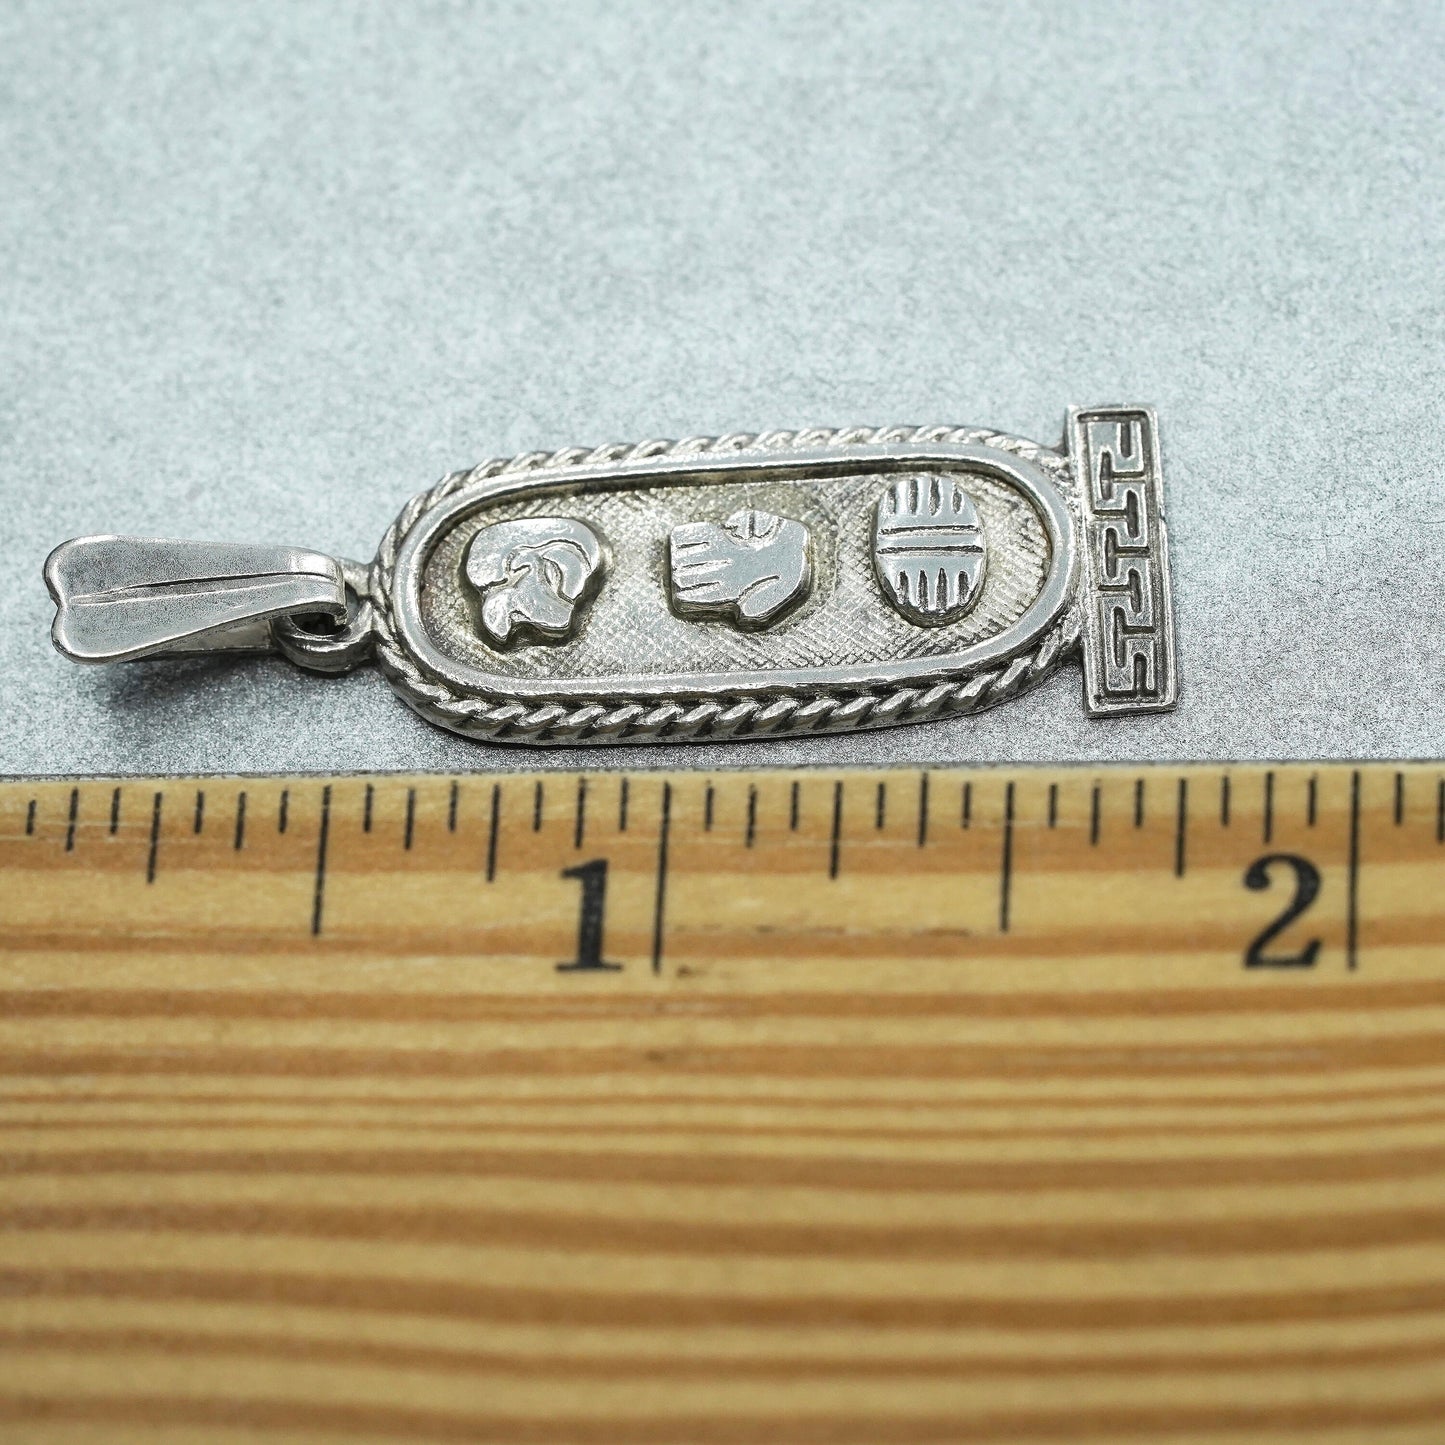 VTG Mexican sterling 925 silver handmade embossed mayan figure pendant charm